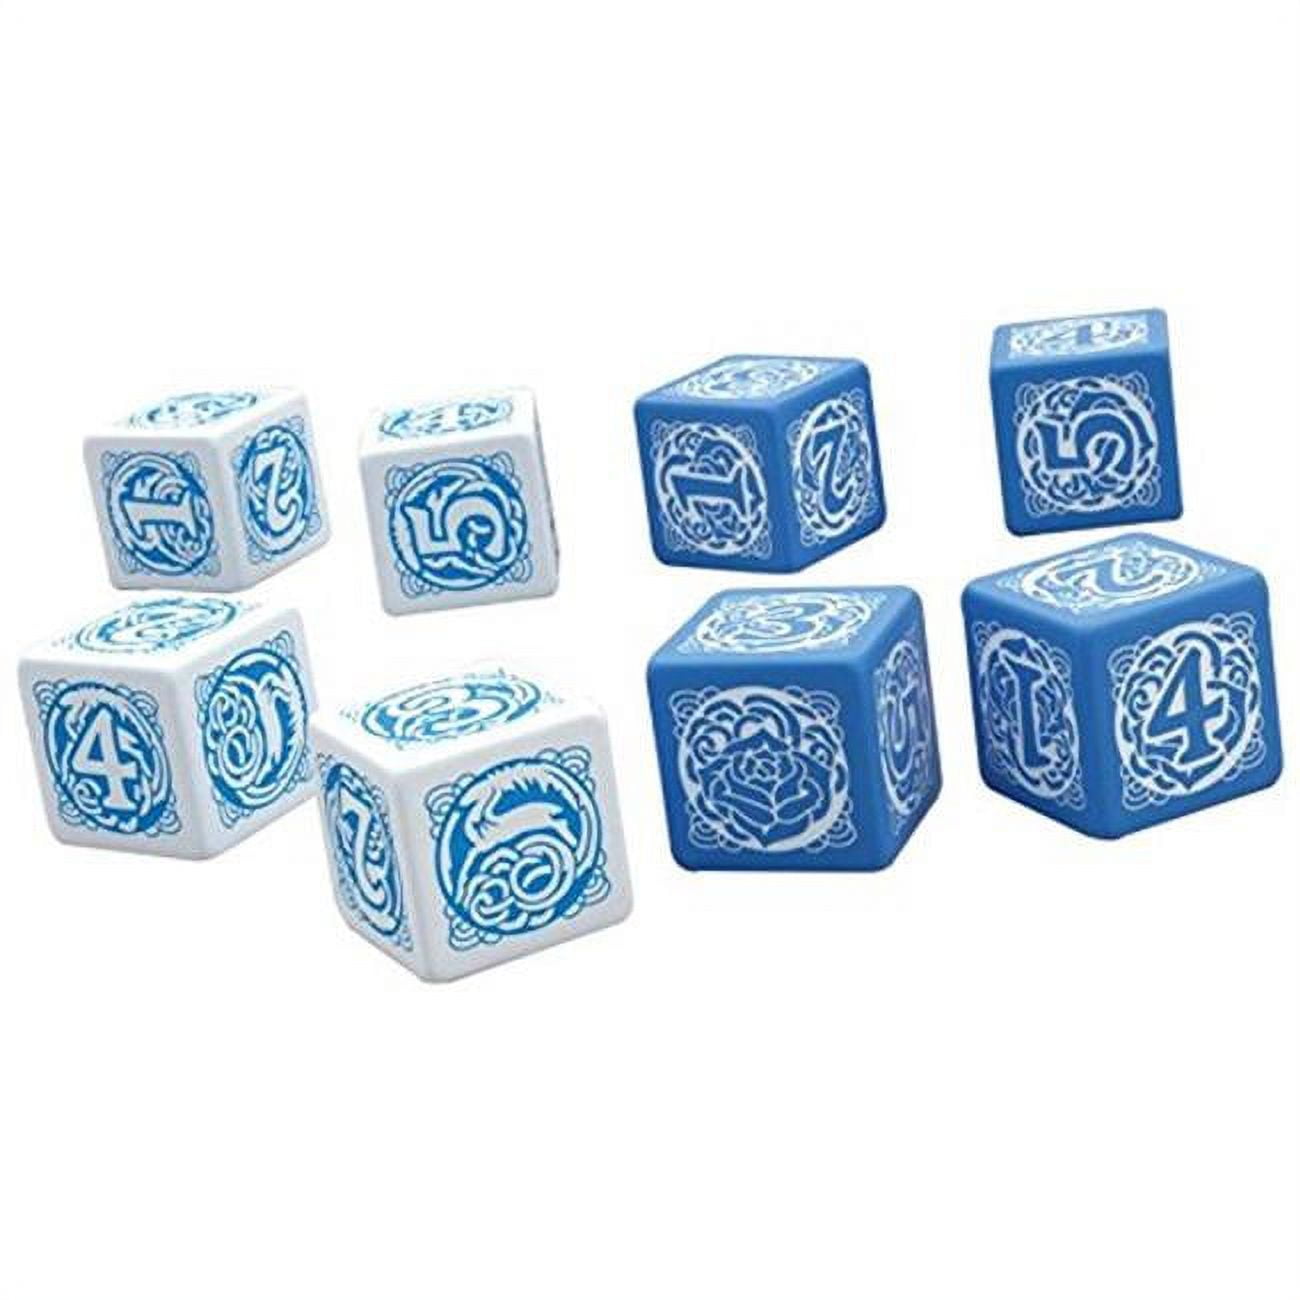 Picture of Green Ronin Publishing GRR6504 Dice Set, Blue & Rose